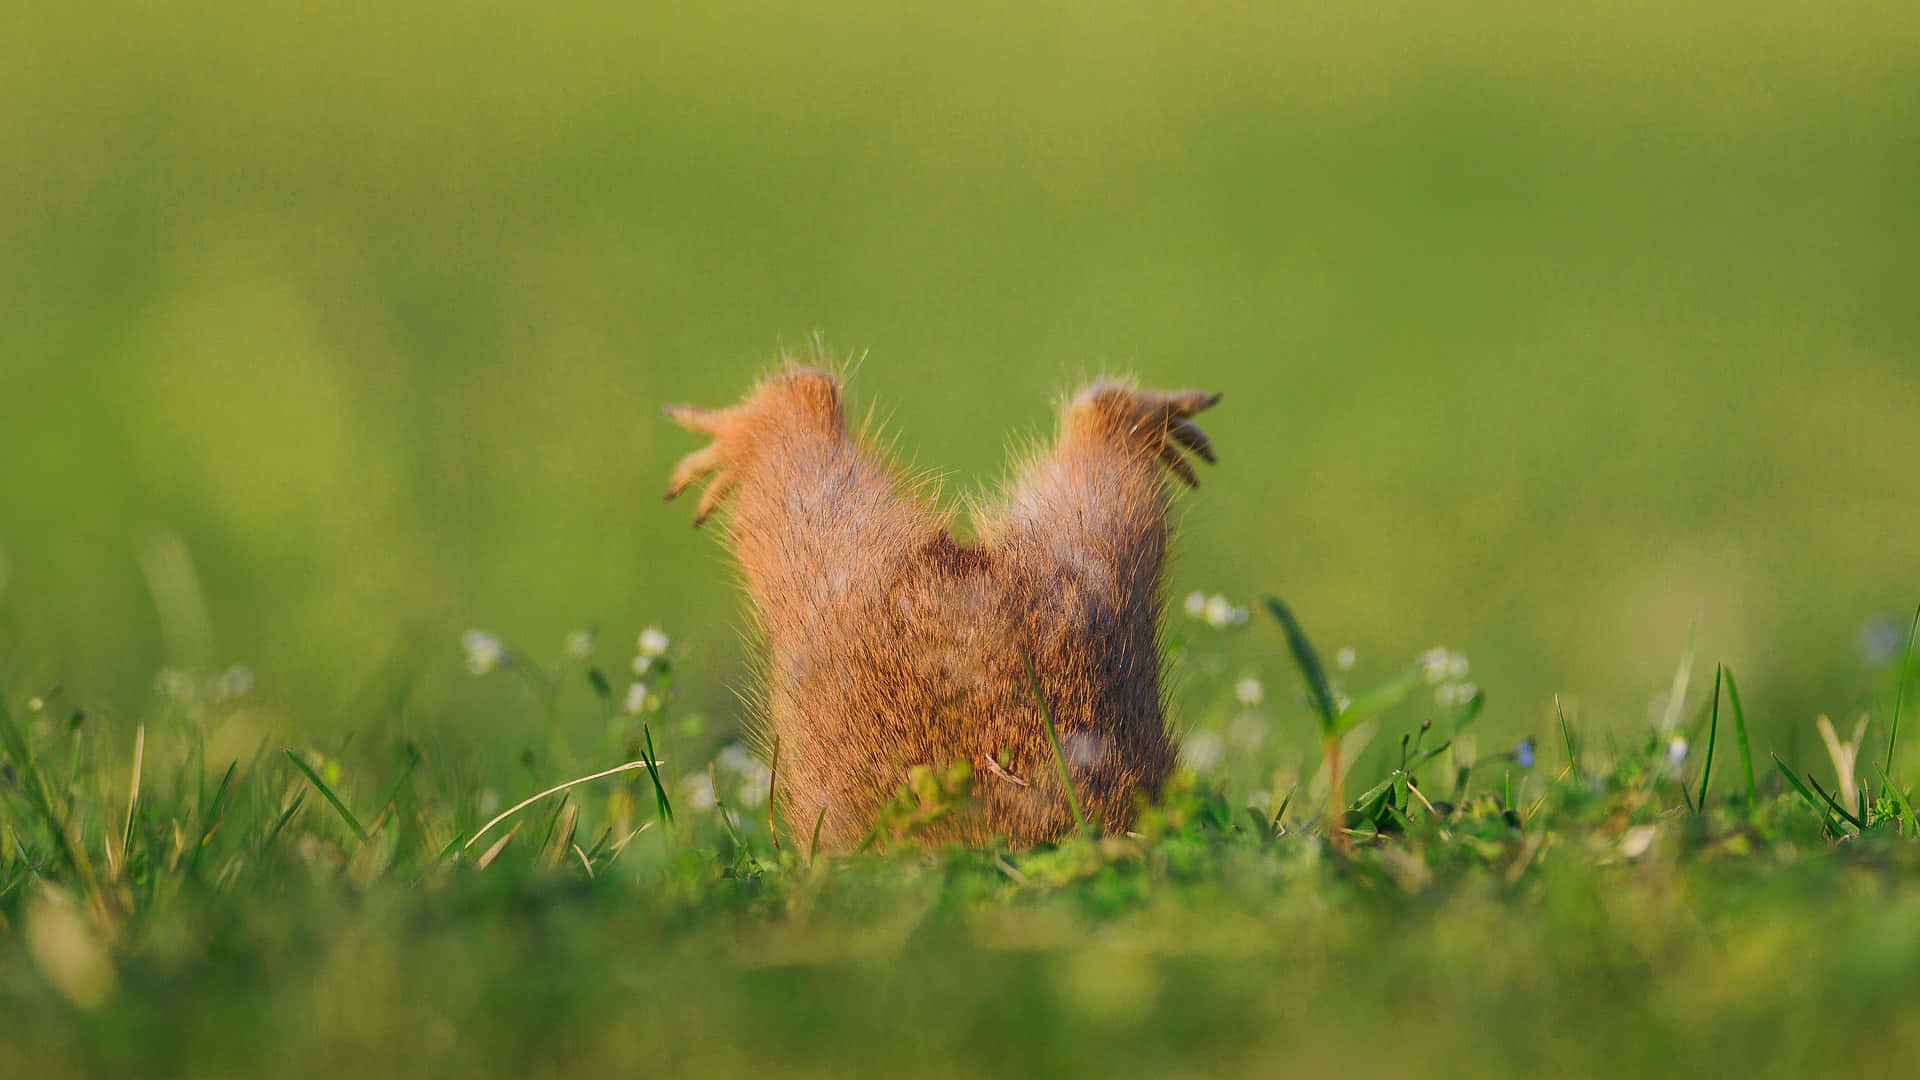 A Squirrel Is Standing In The Grass With Its Back Legs Up